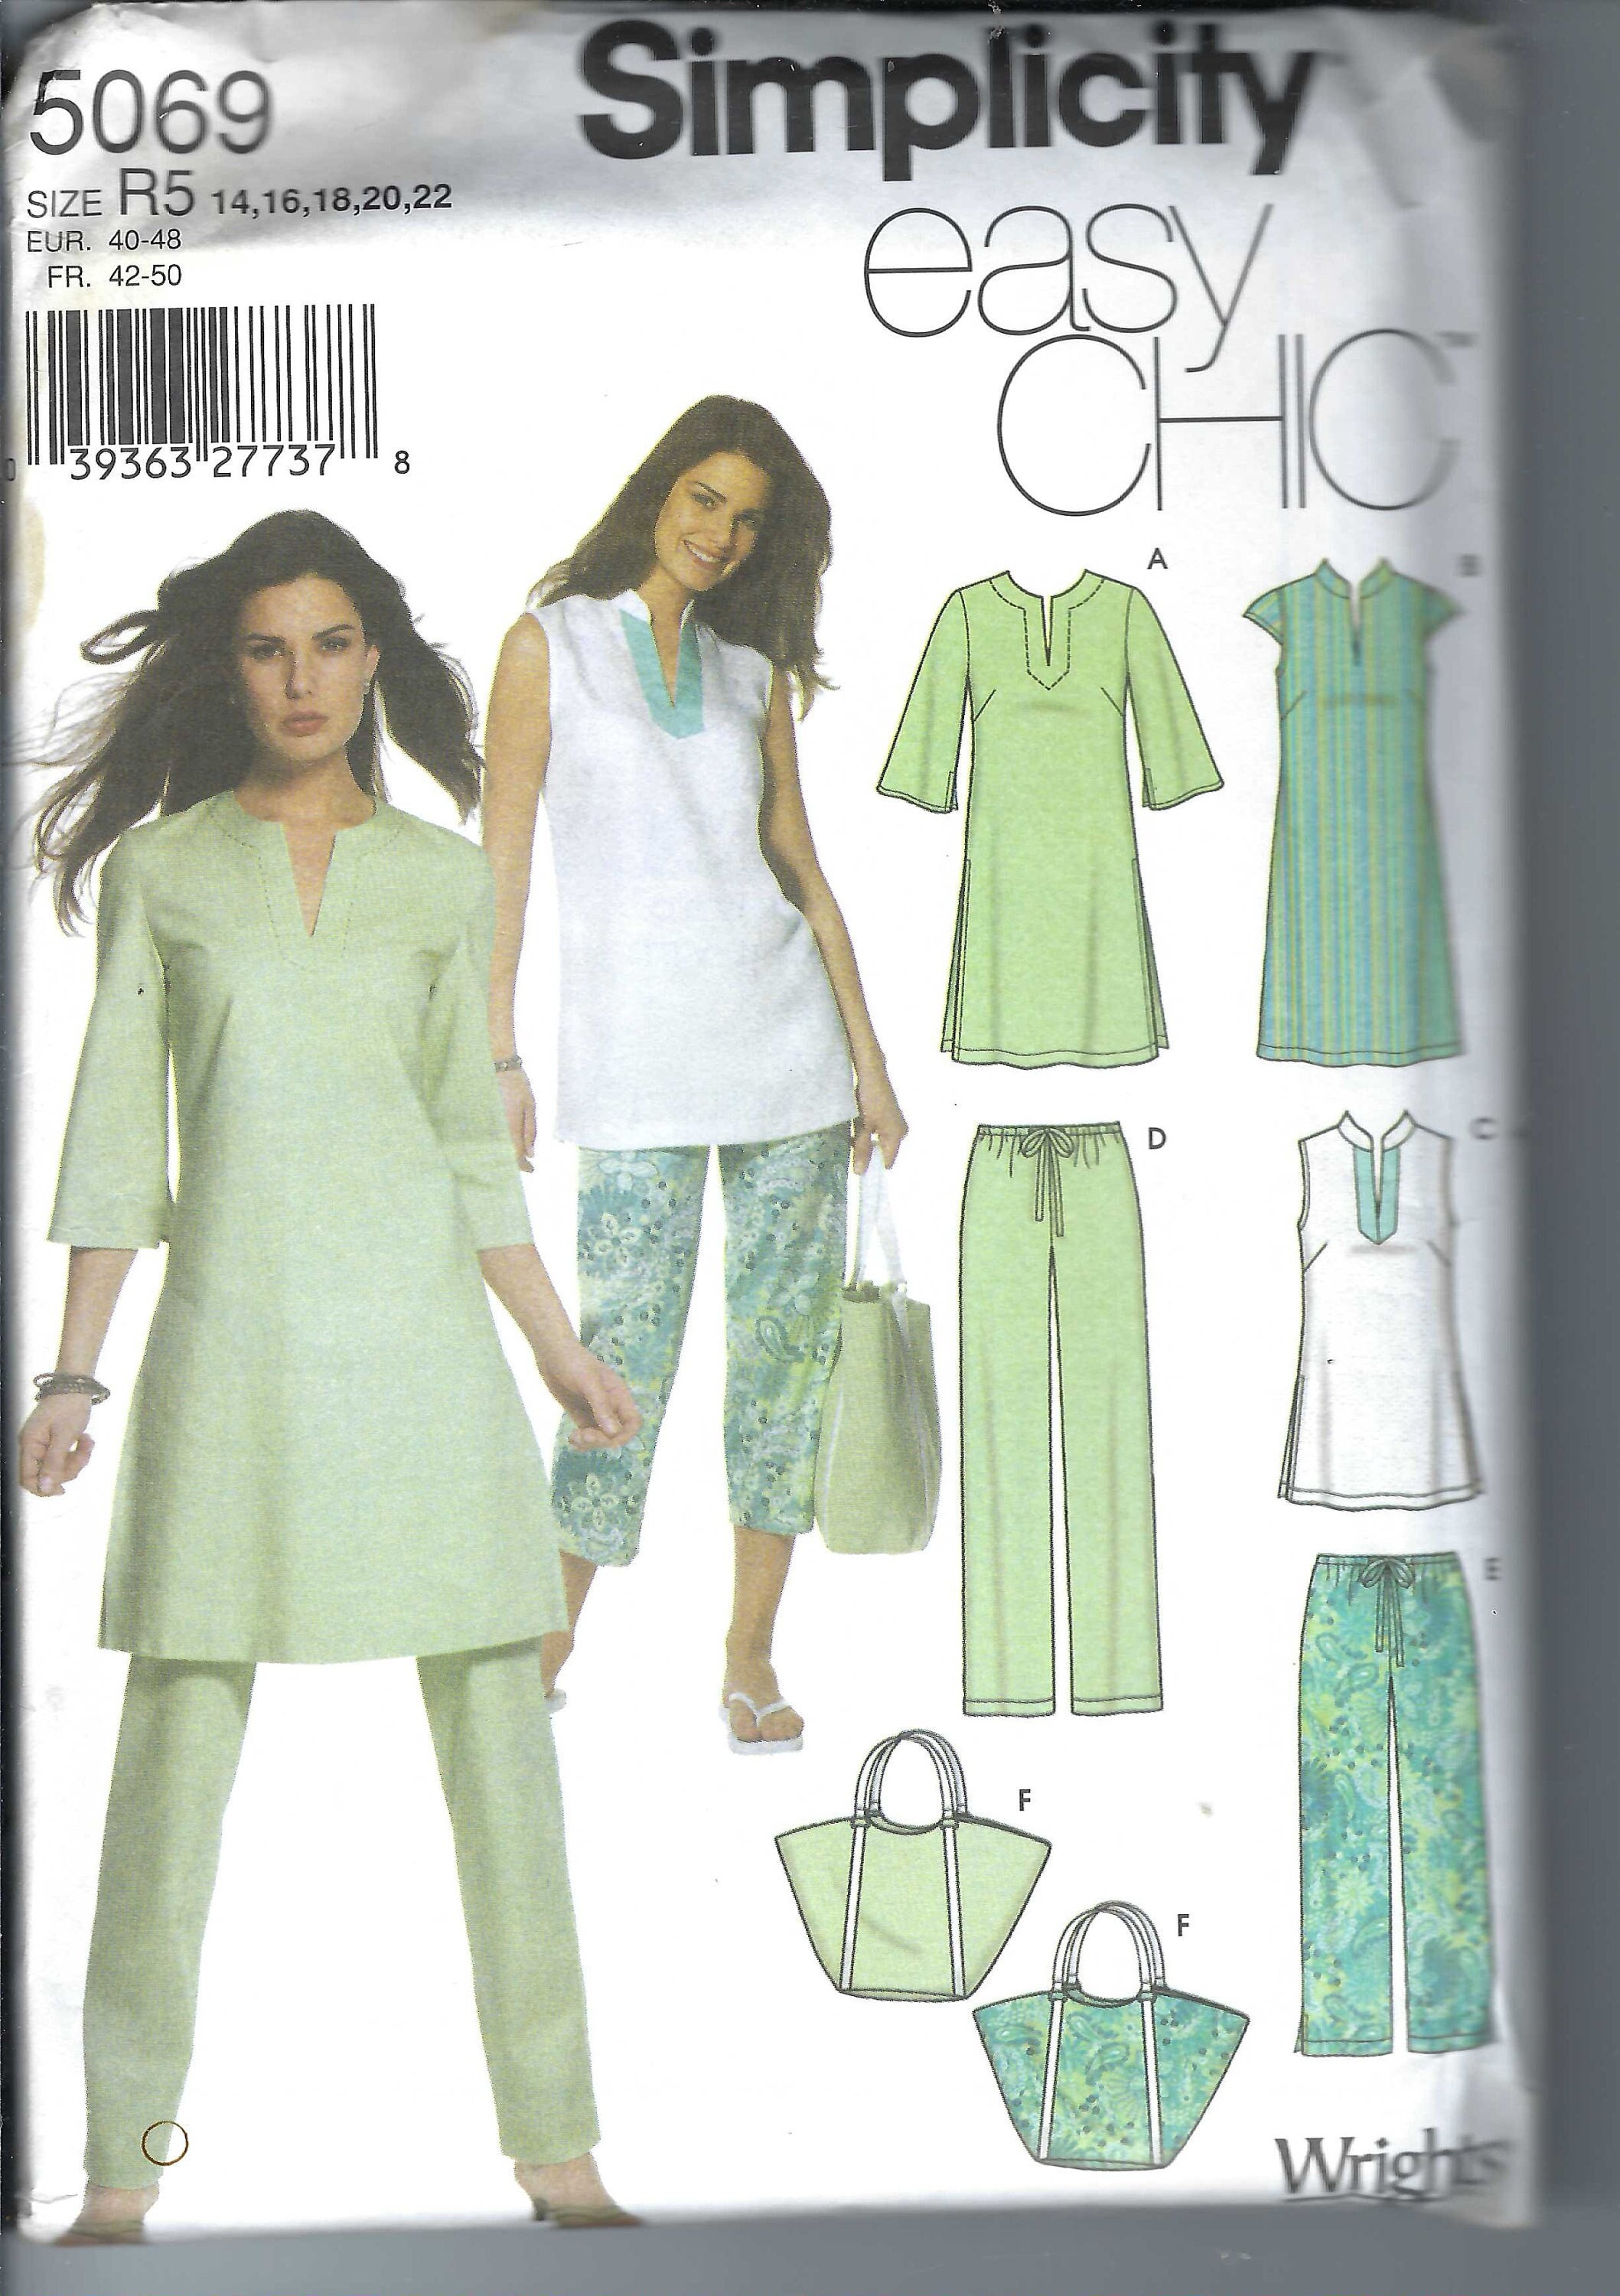 PDF Patterns — Ford wardrobe Learn to sew with beginner sewing patterns